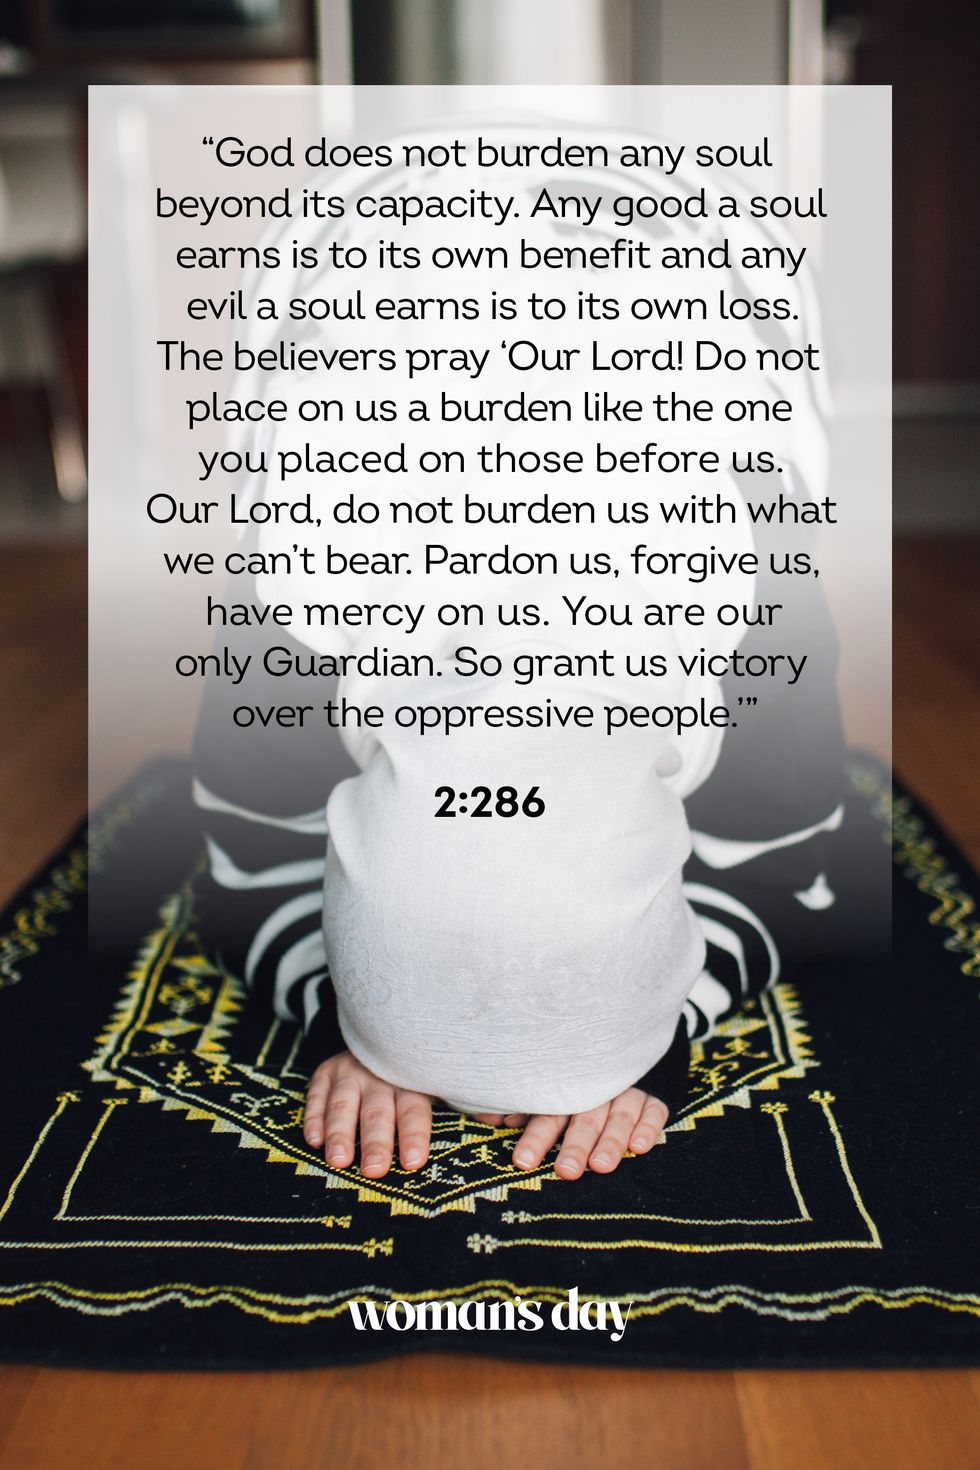 ISLAMIC QUOTES ABOUT DEATH –